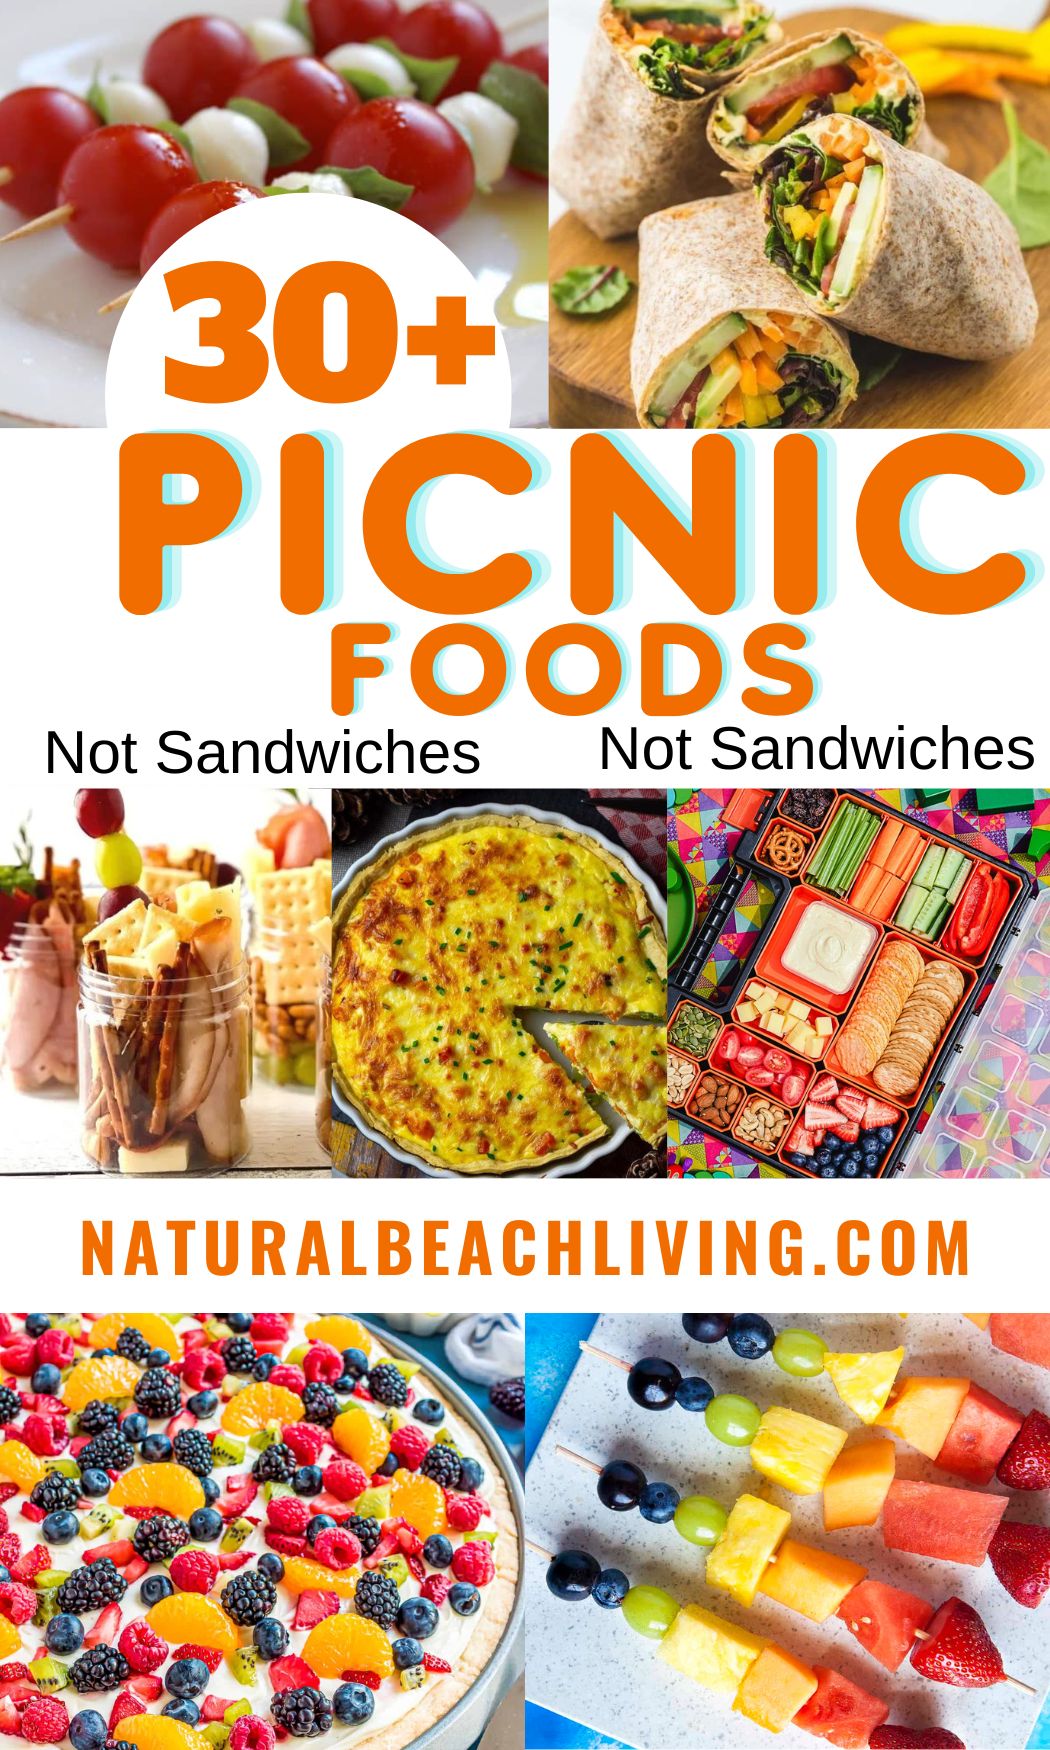 30+ Delicious Picnic Food Ideas Not Sandwiches for Kids and Adults